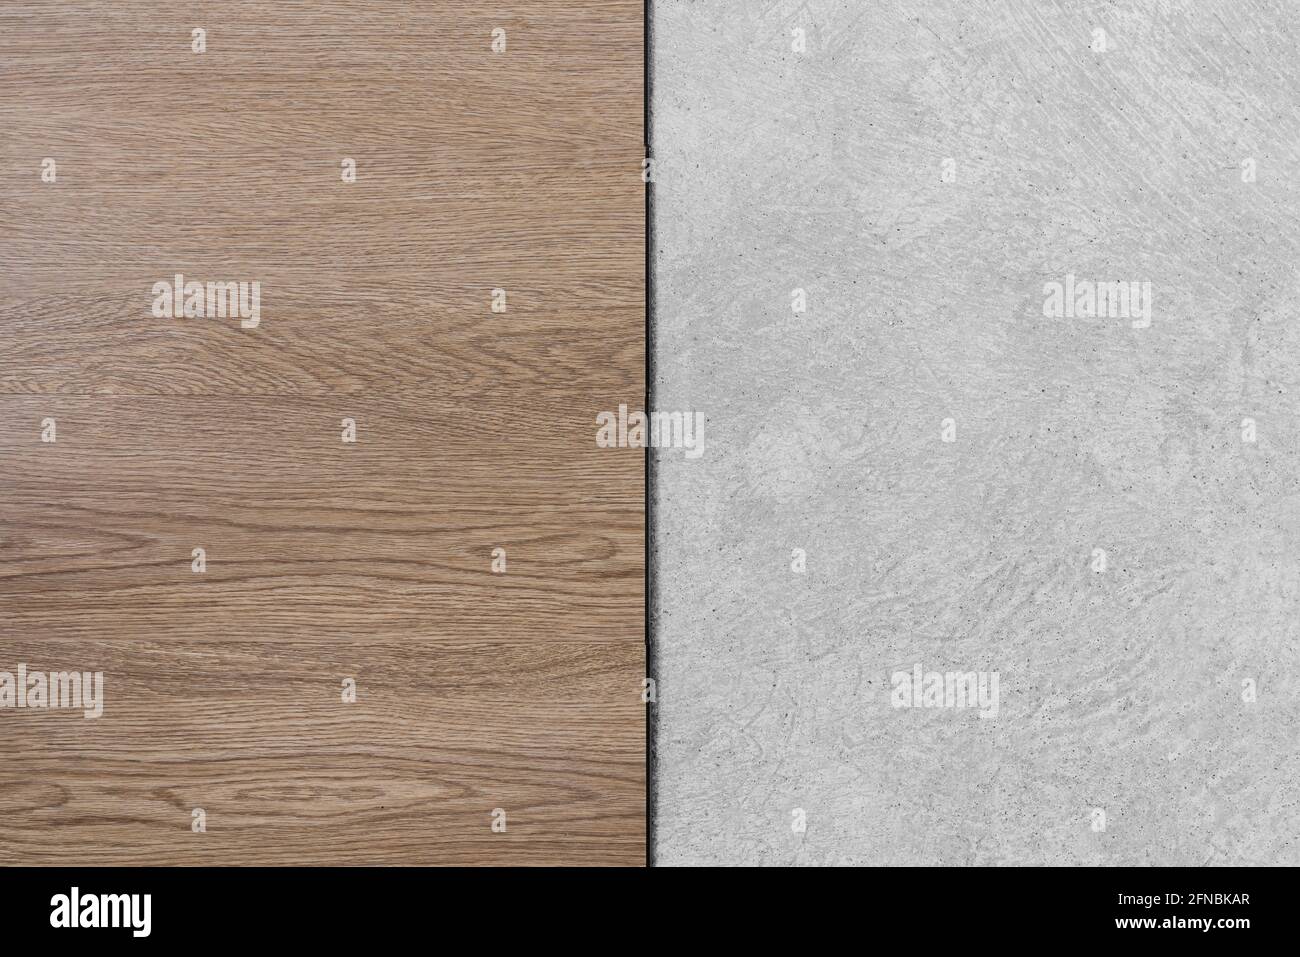 Wooden and concrete cement floor texture Stock Photo